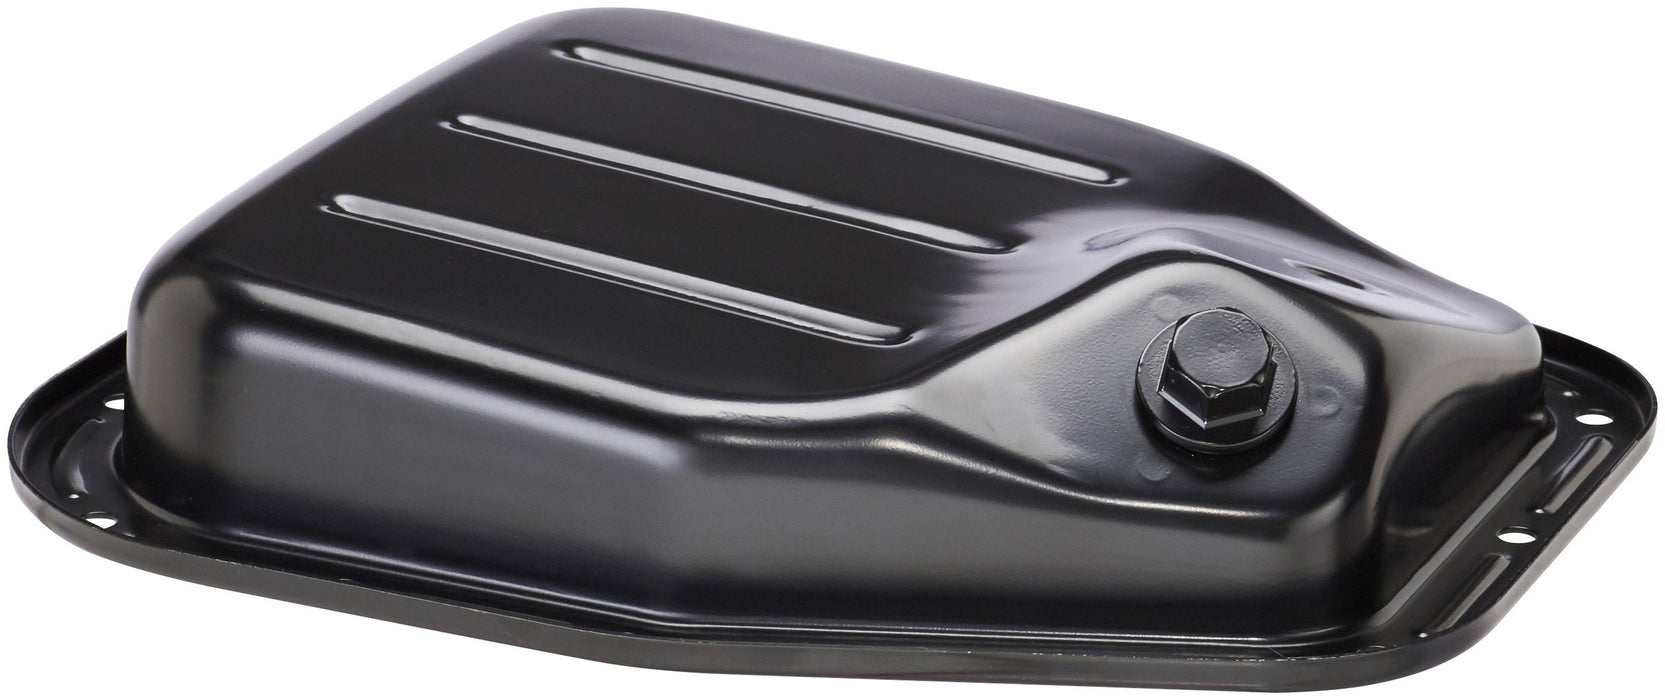 Engine Oil Pan for Subaru Tribeca 3.6L H6 2014 2013 2012 2011 2010 2009 2008 - Spectra SUP08A